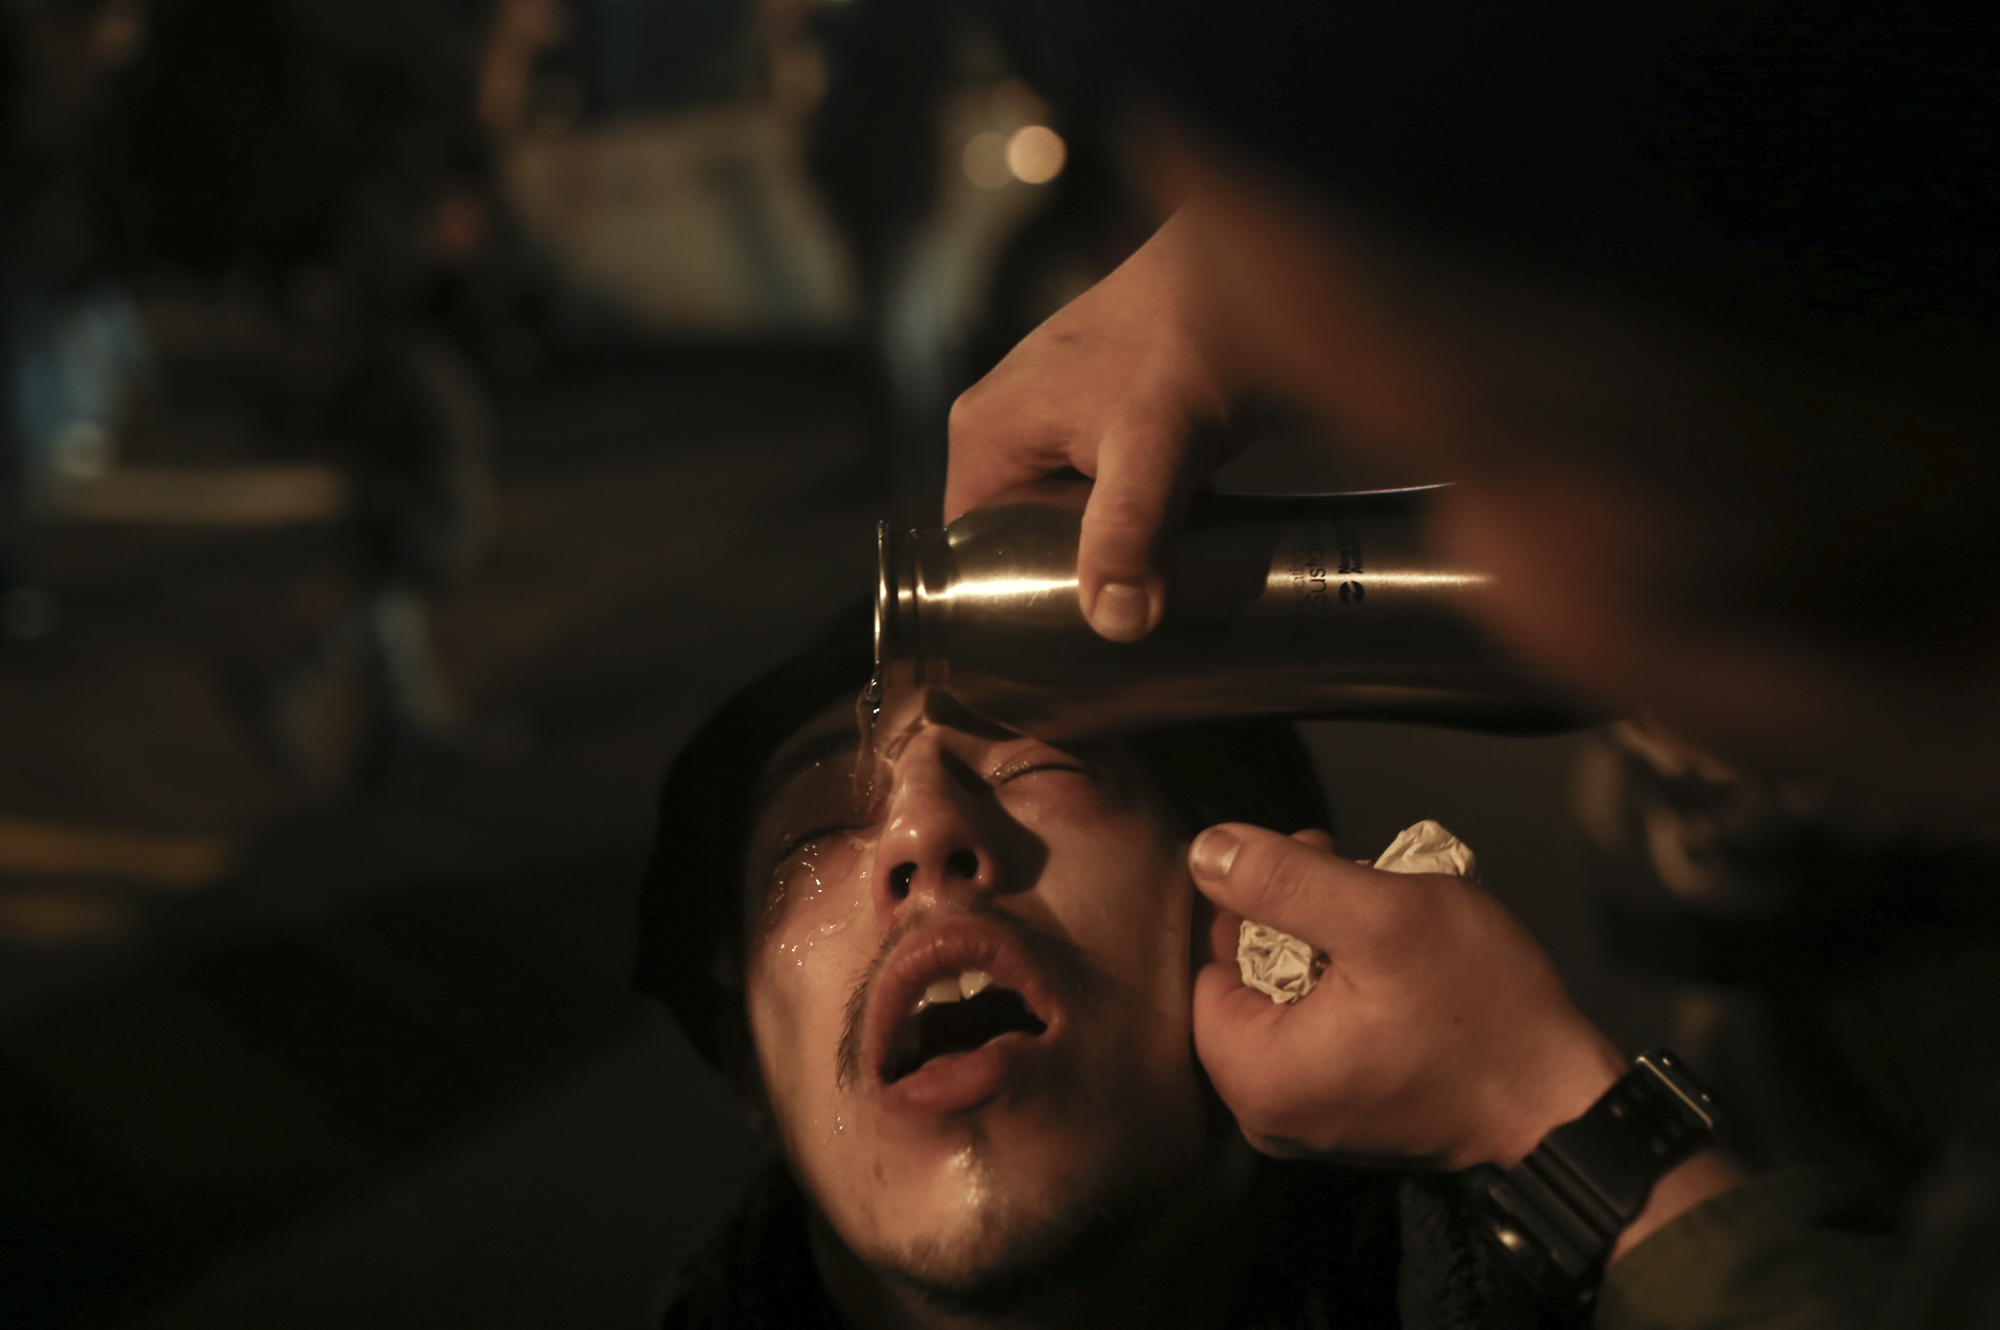  A protestor reacts as a friend &nbsp;rinses his eyes. Riot officers used pepper spray on protestors on 11th Street and M Street in downtown Washington D.C. following President Donald Trump's inauguration on January 20, 2017 